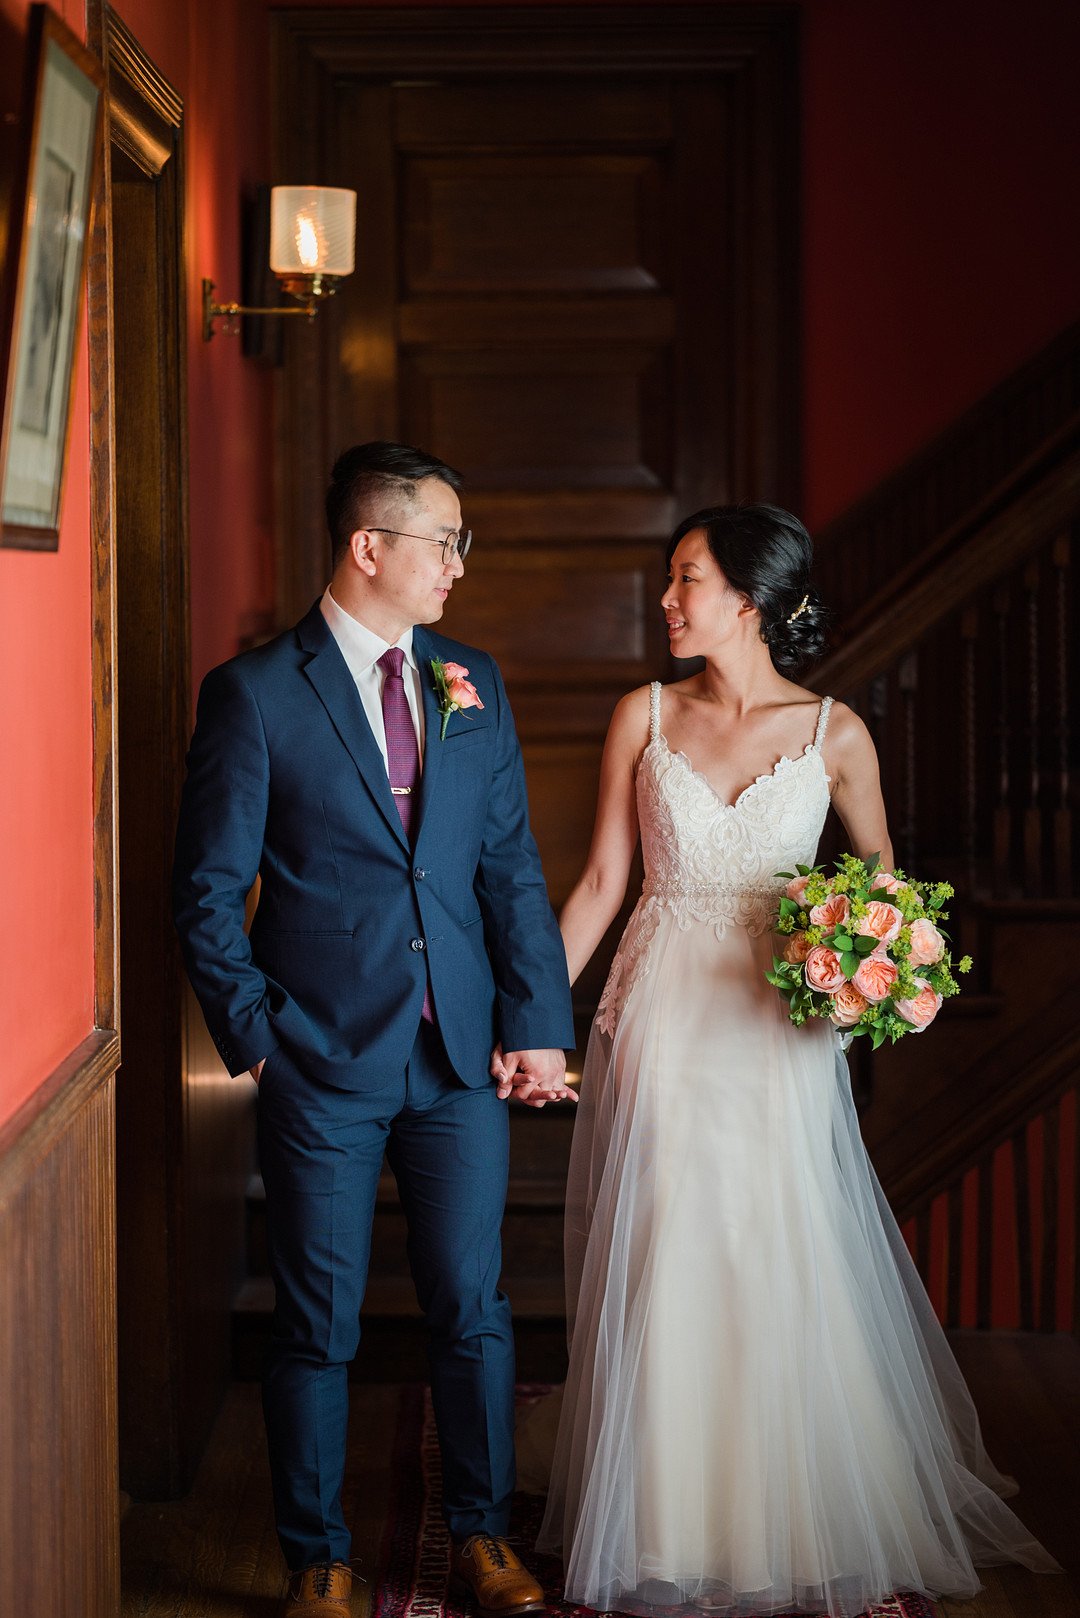 Chan_Chan_Winterlyn Photography_GLESSNER HOUSE CHICAGO WEDDING-39_low.jpg